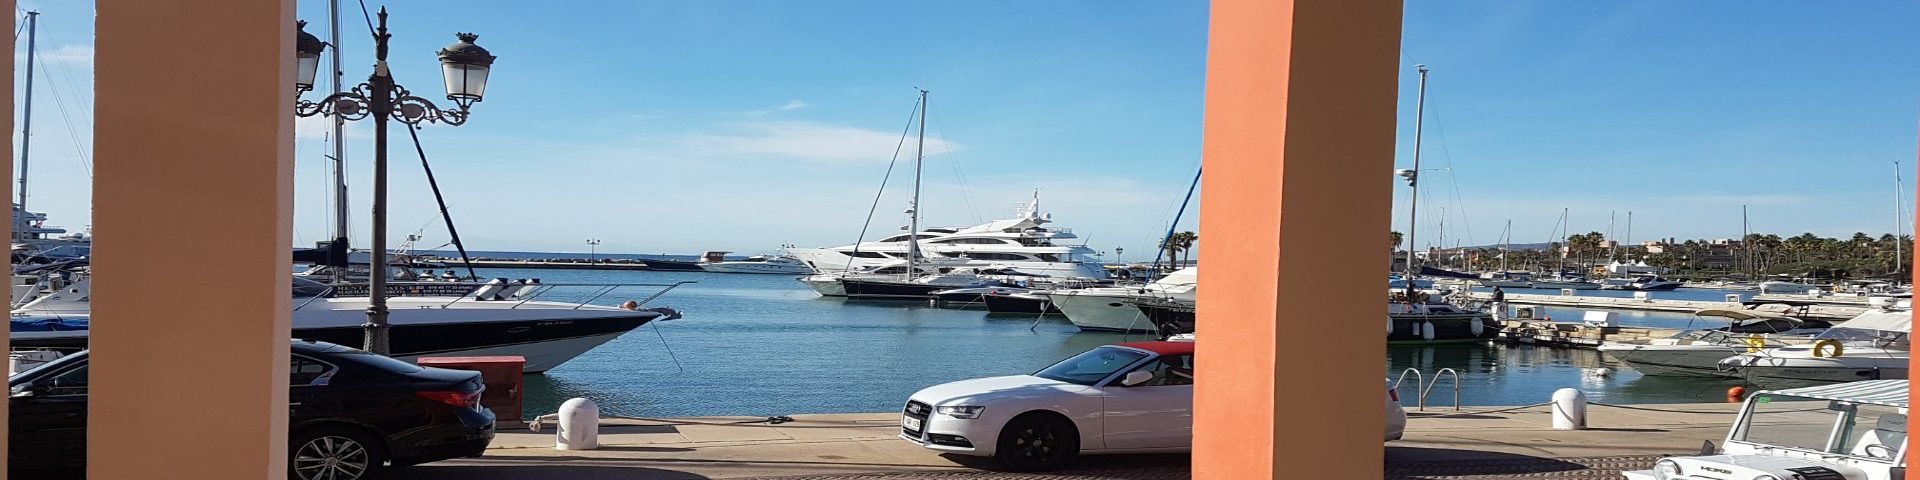 View out to the Sotogrande Marina